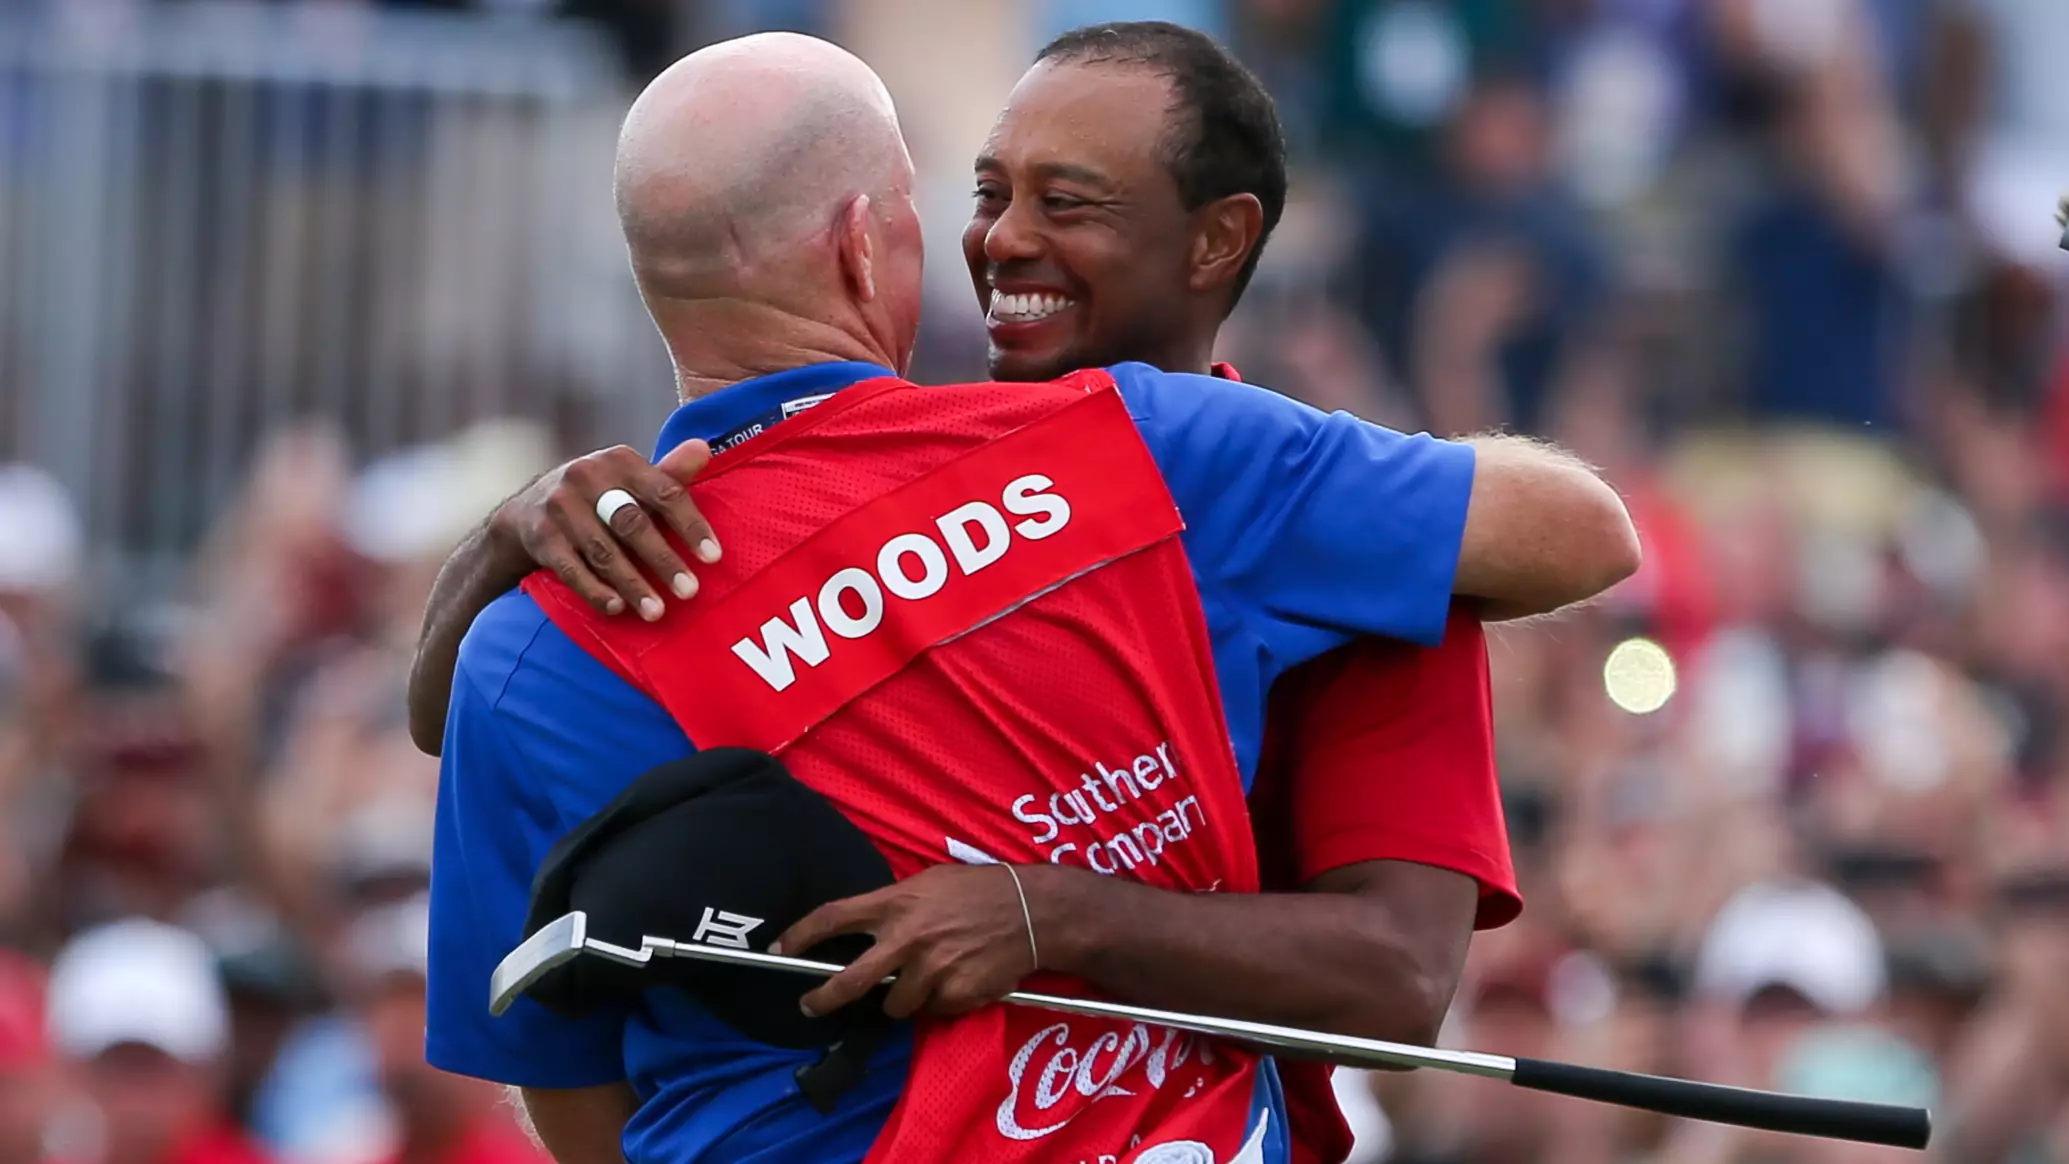 Tiger Woods Historic Comeback After Many Wrote Him Off Is The Inspiration We All Need